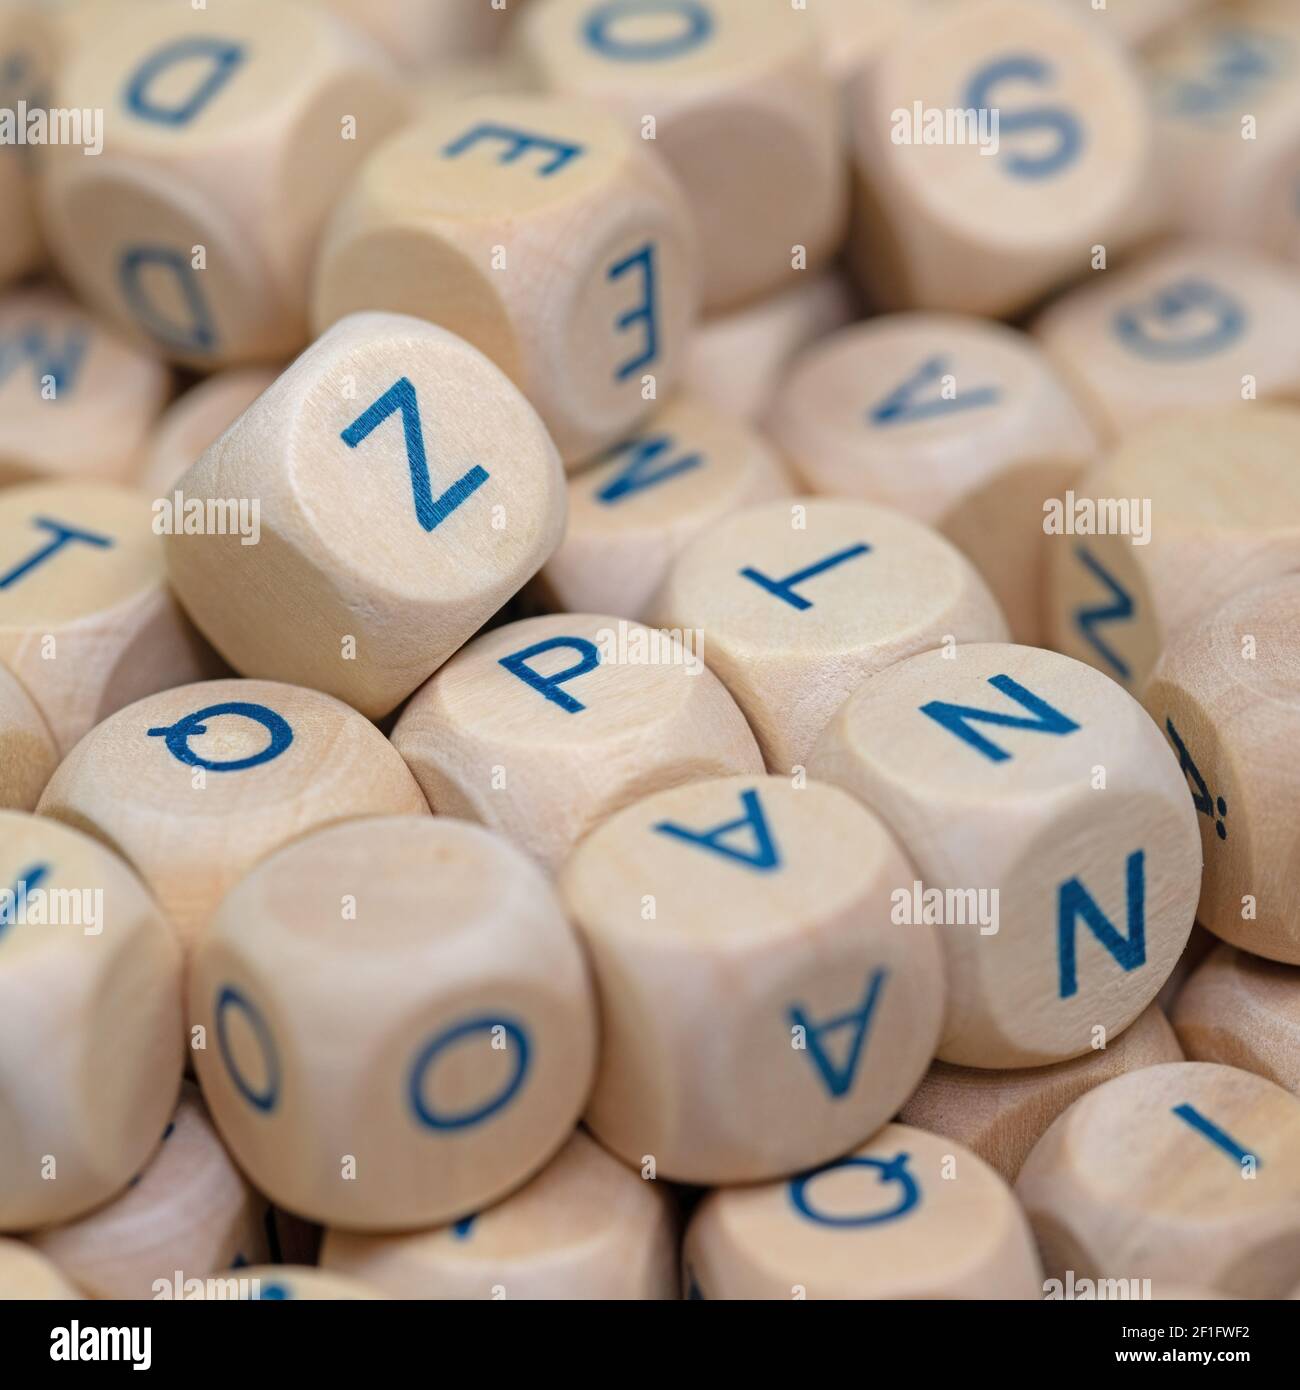 Lots of wooden cubes with letters printed on them Stock Photo